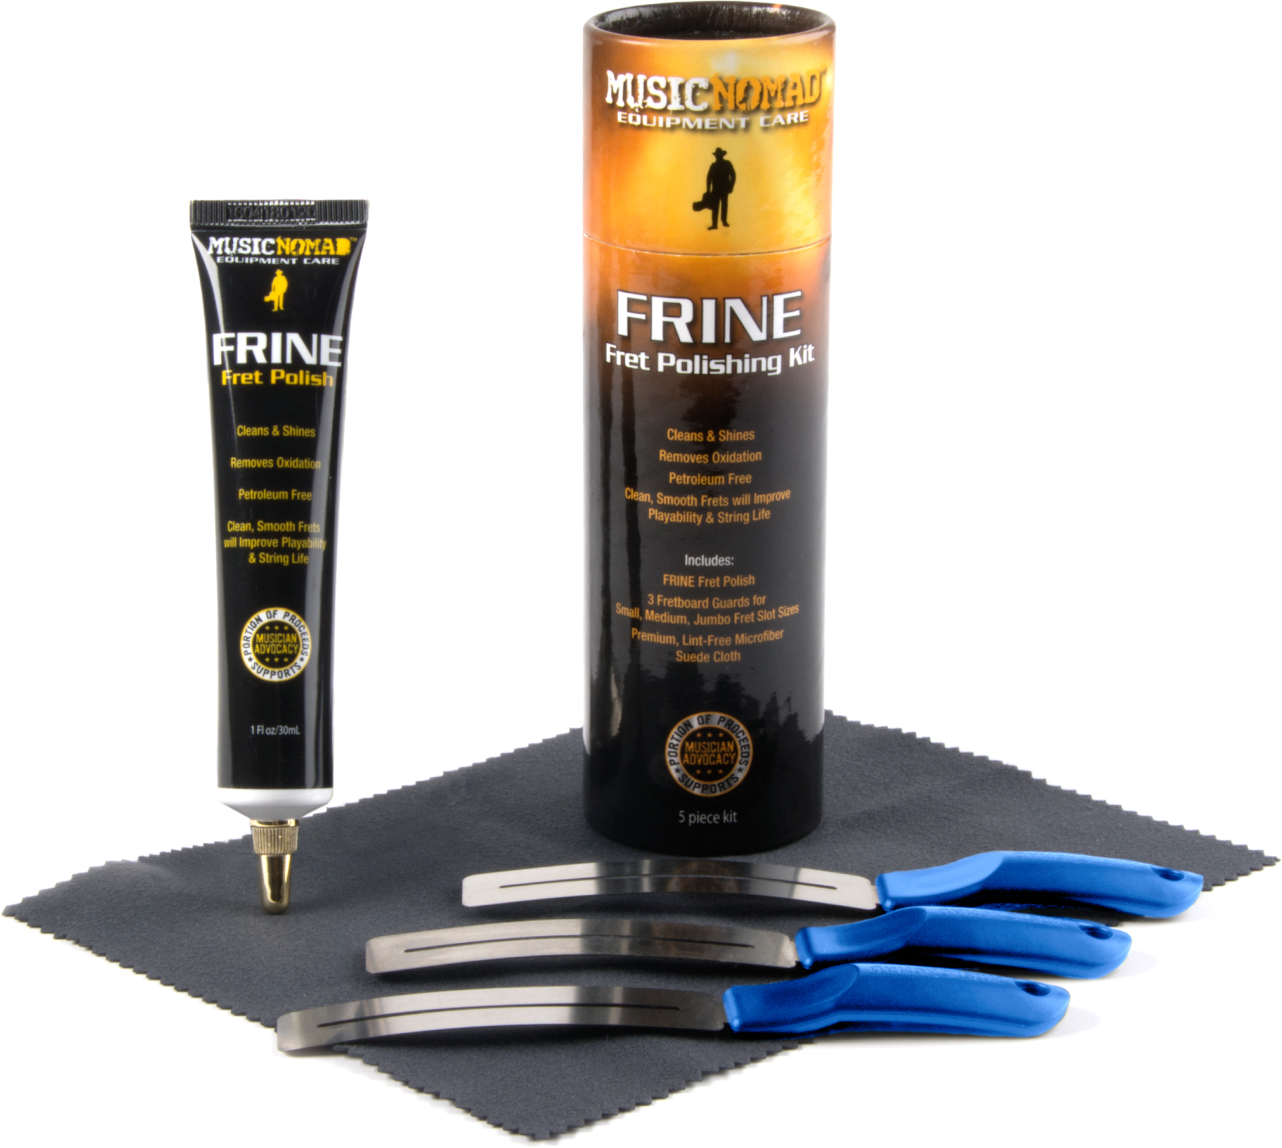 Musicnomad Frine Fret Polishing Kit(mn 124) - Care & Cleaning Guitarra - Main picture